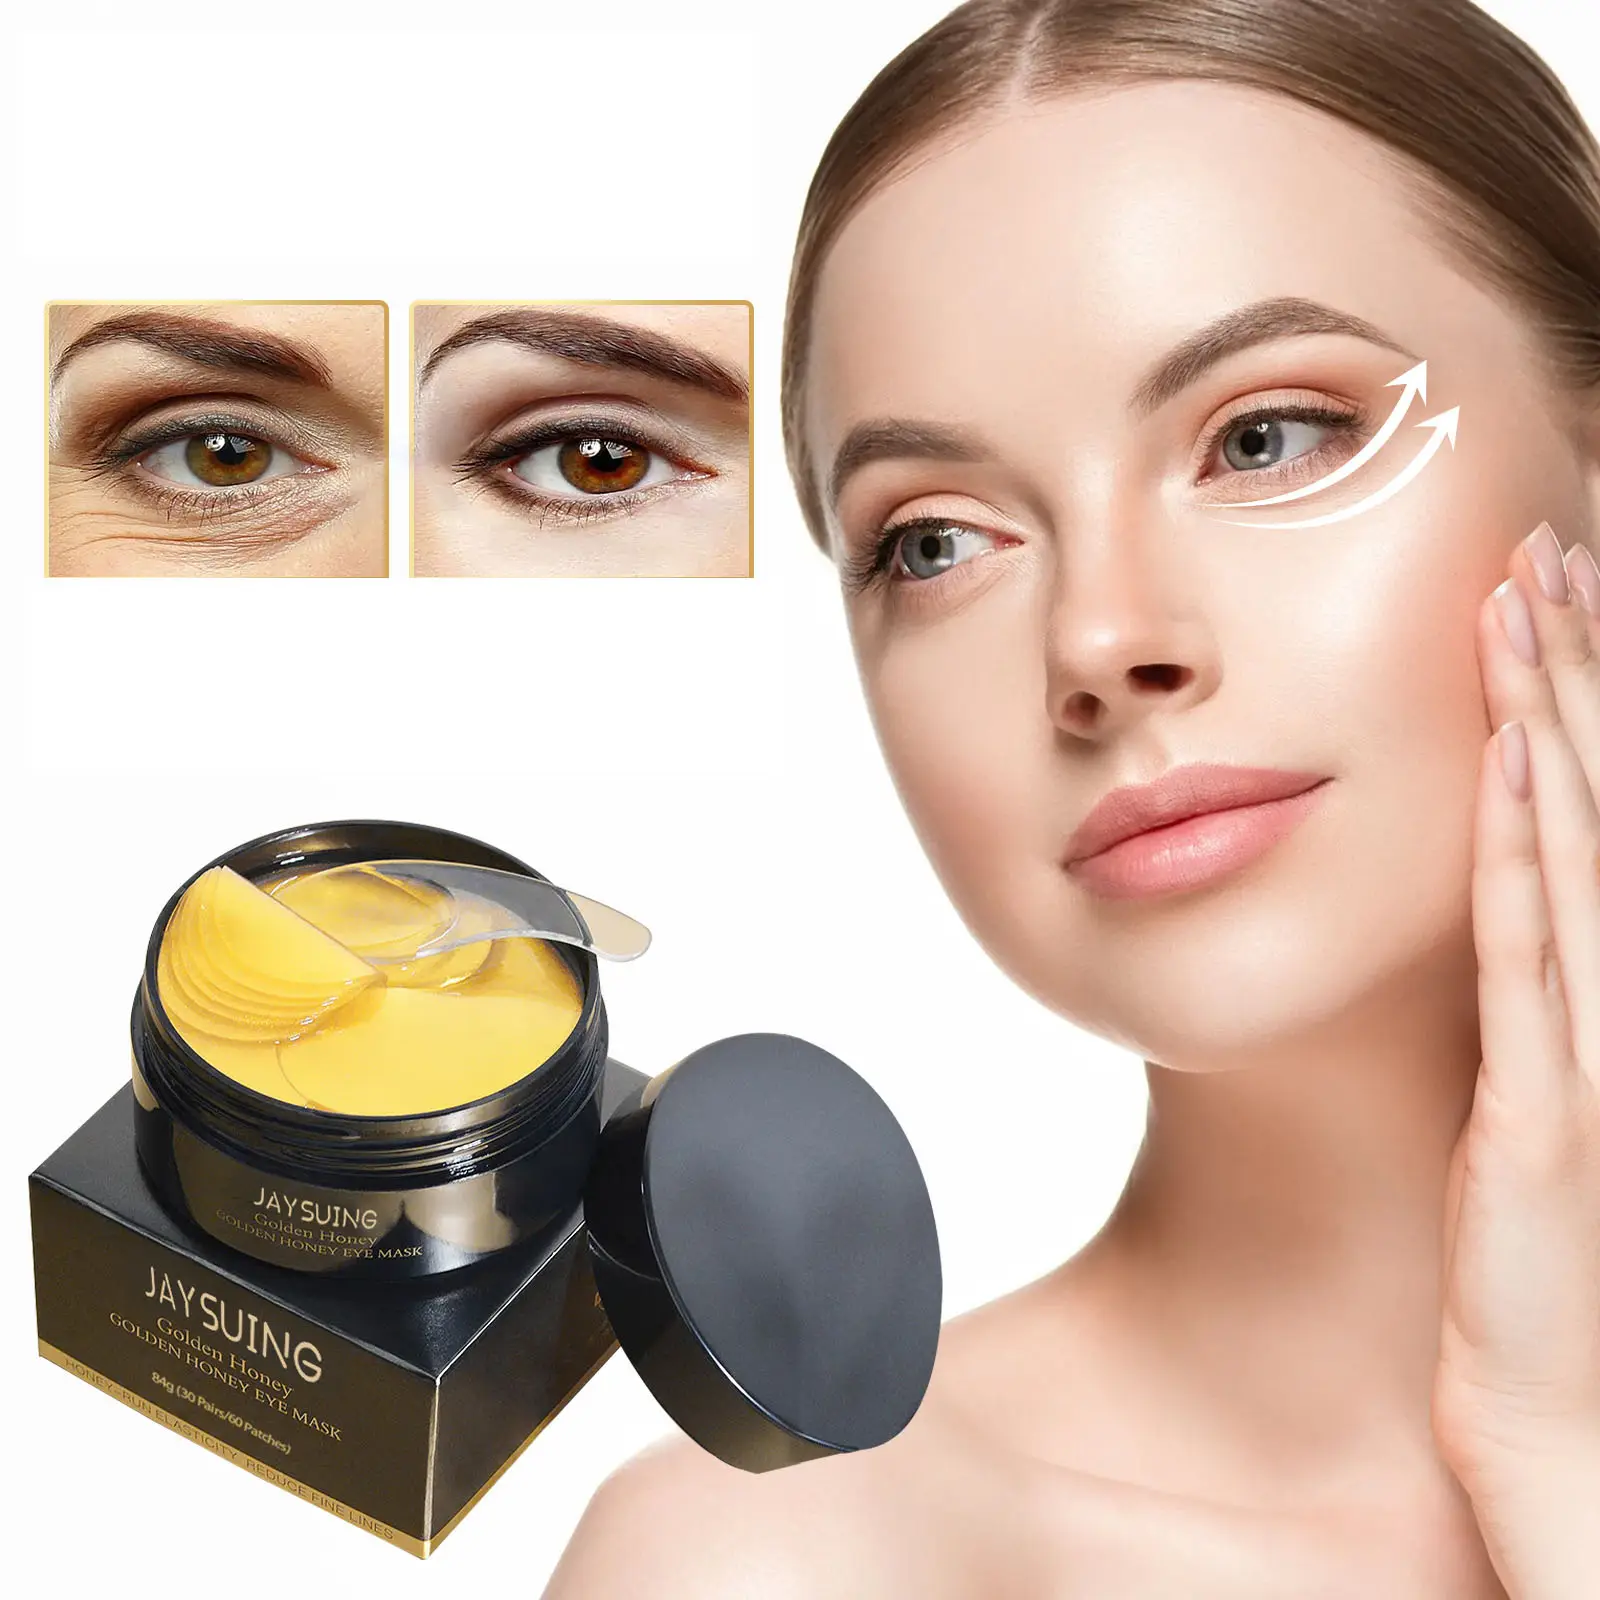 Golden Snail Collagen Eye Mask Relieves Fine Lines, Burdens, Moisturizes, Firms, and Resists Wrinkles in the Eyes